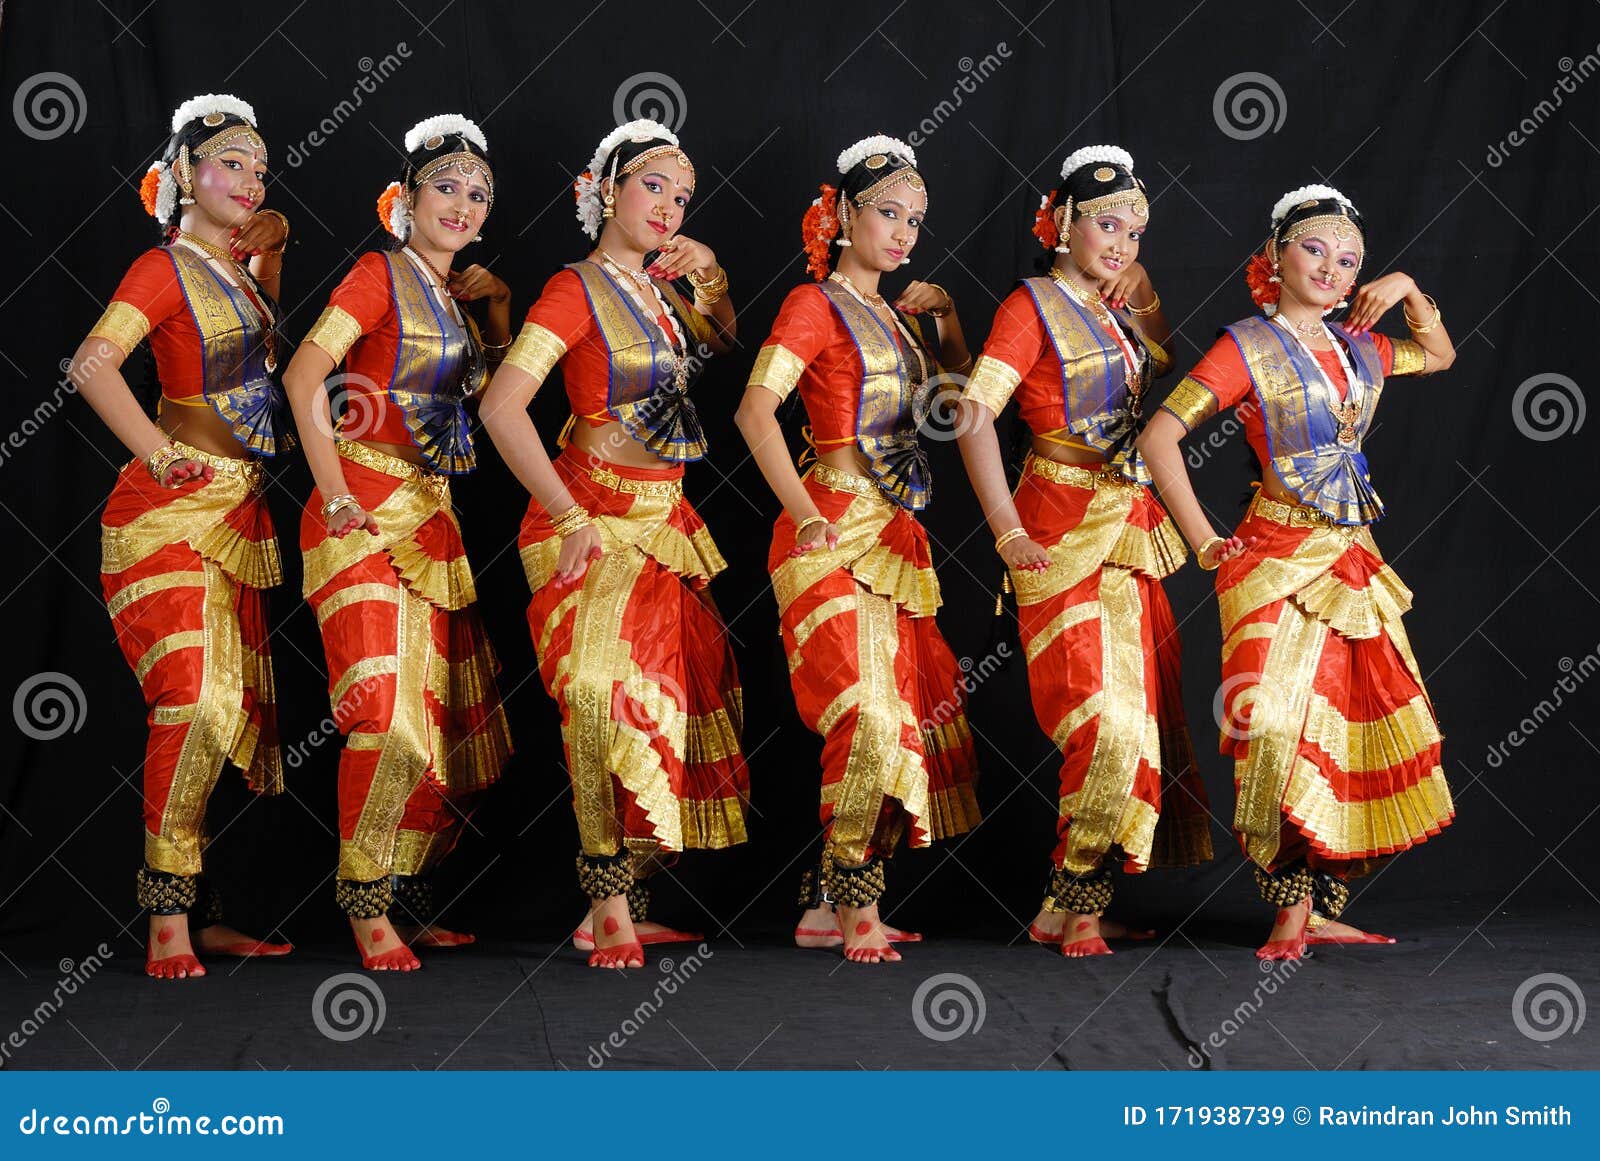 BHARATNATYAM | Dance photography poses, Dance picture poses, Dance poses